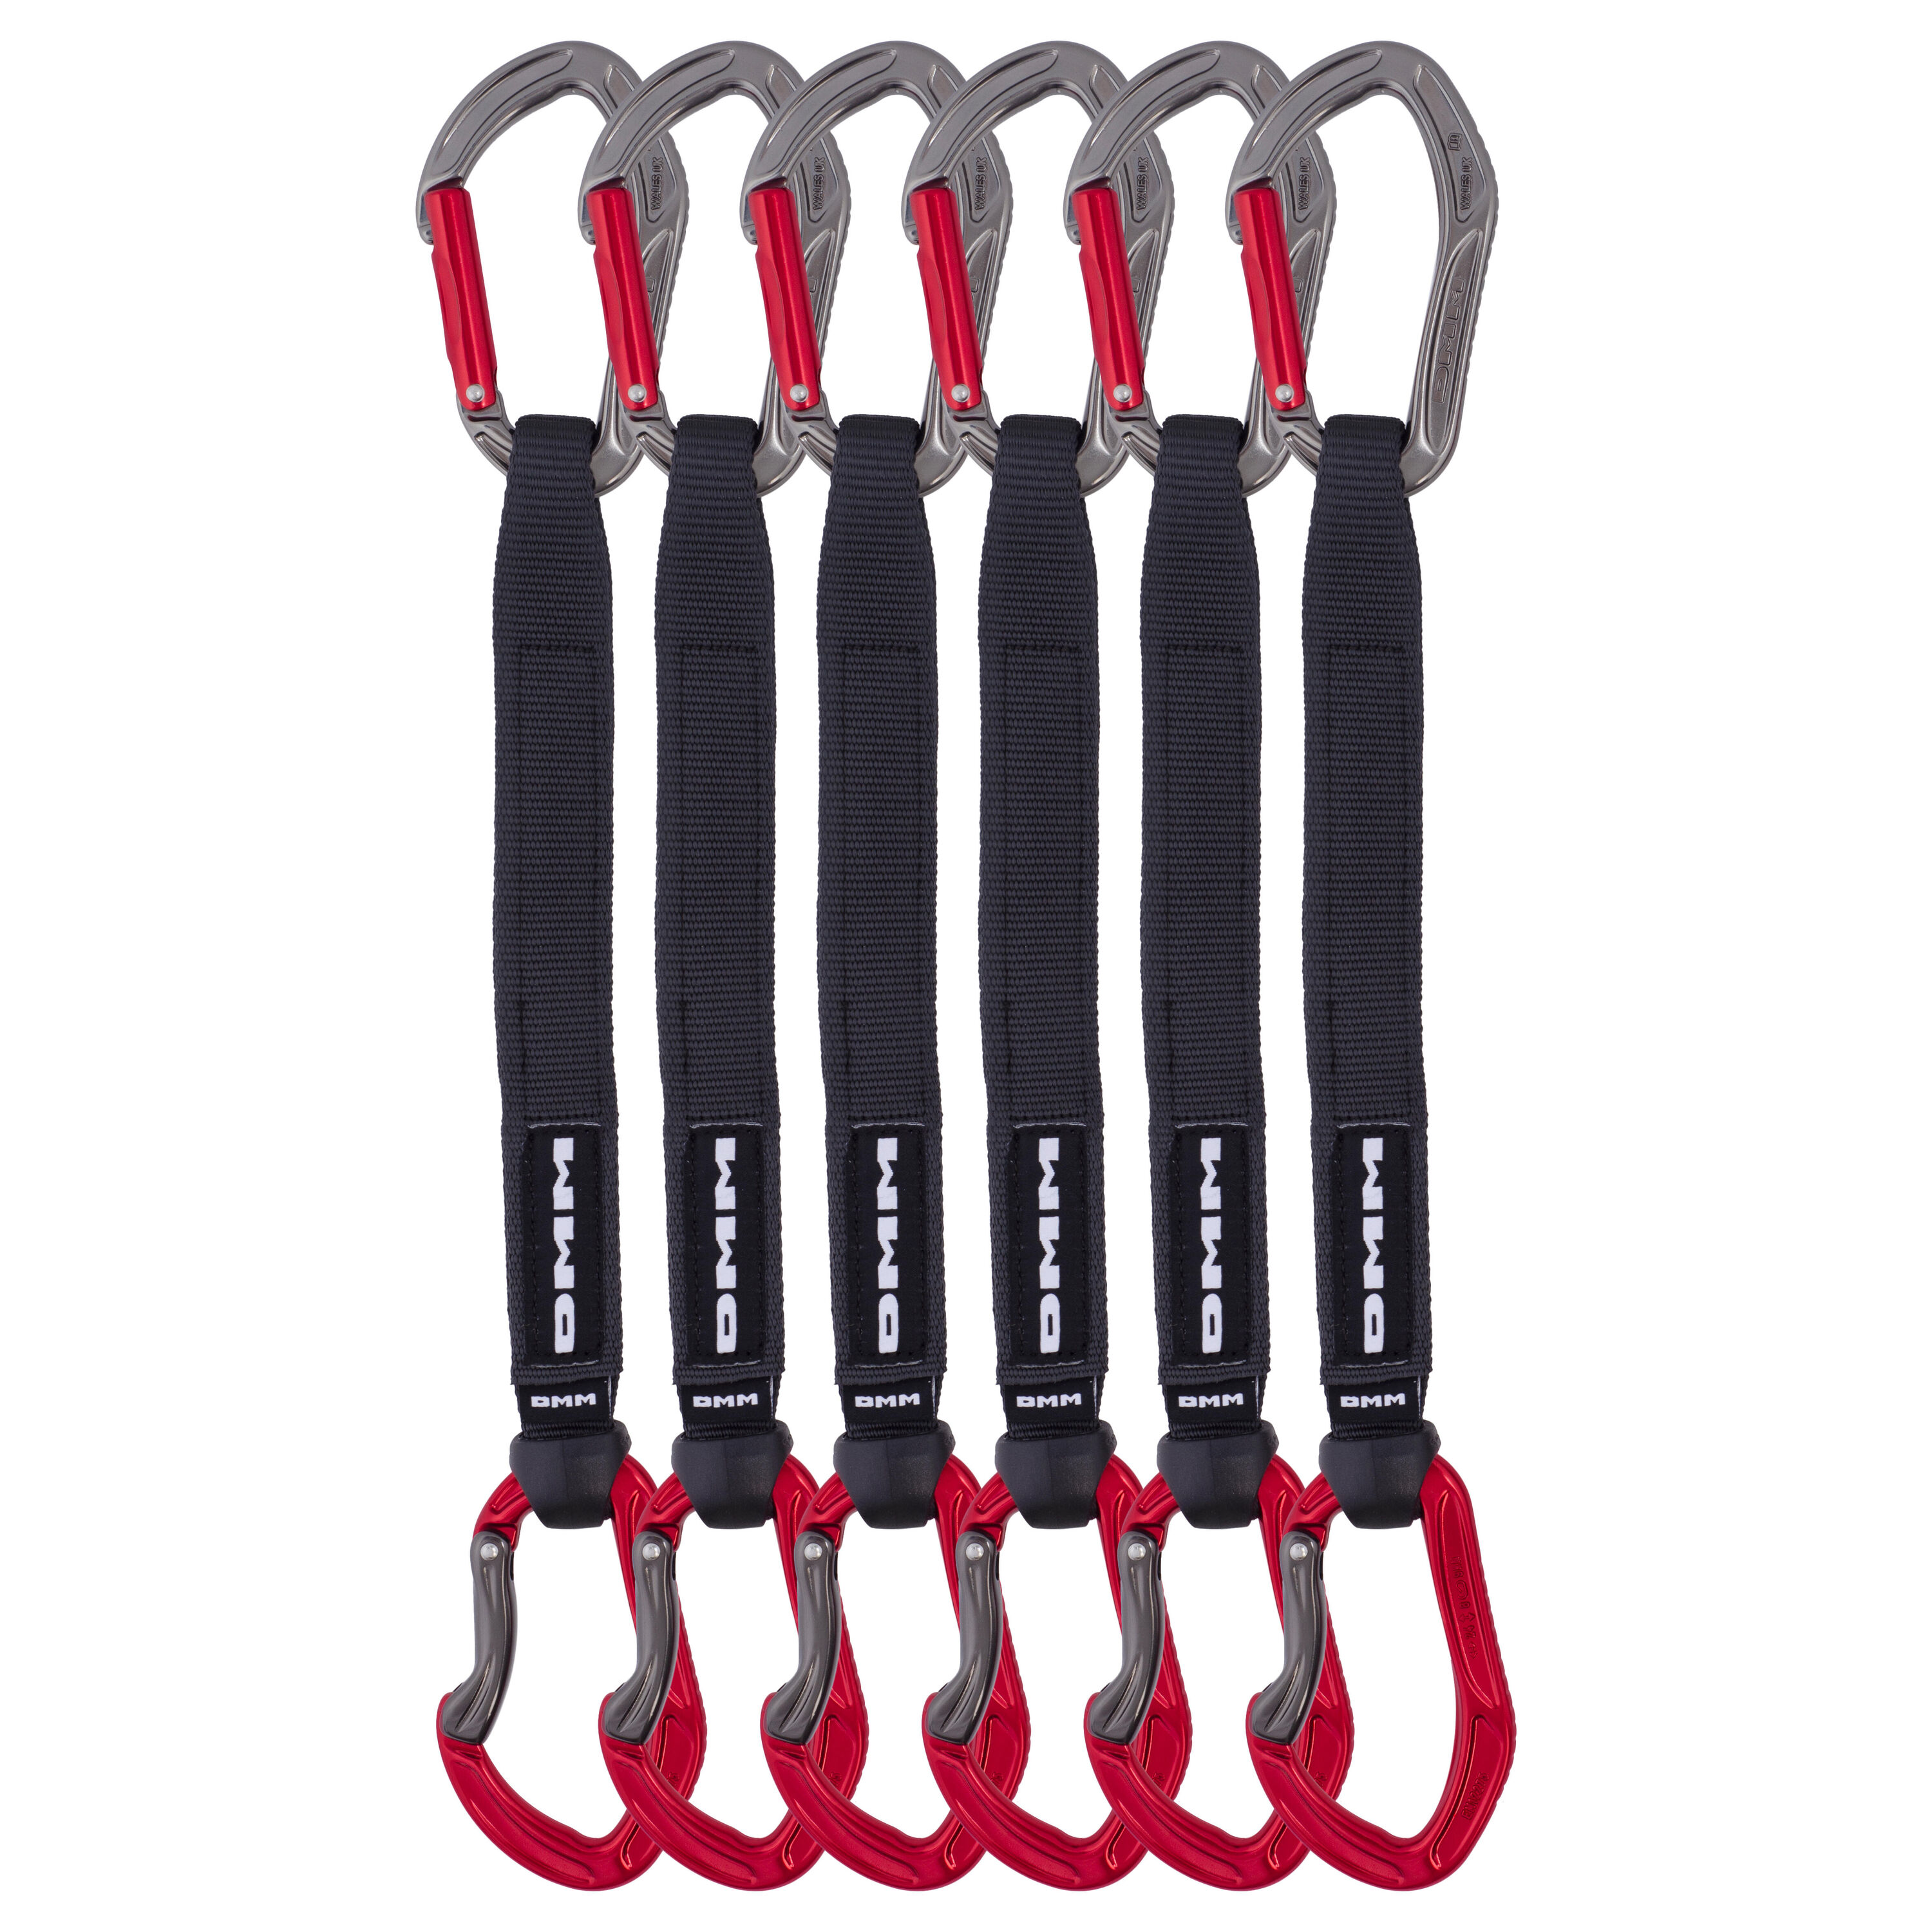 DMM Alpha Sport Quickdraw 25cm - Red - 6 Pack